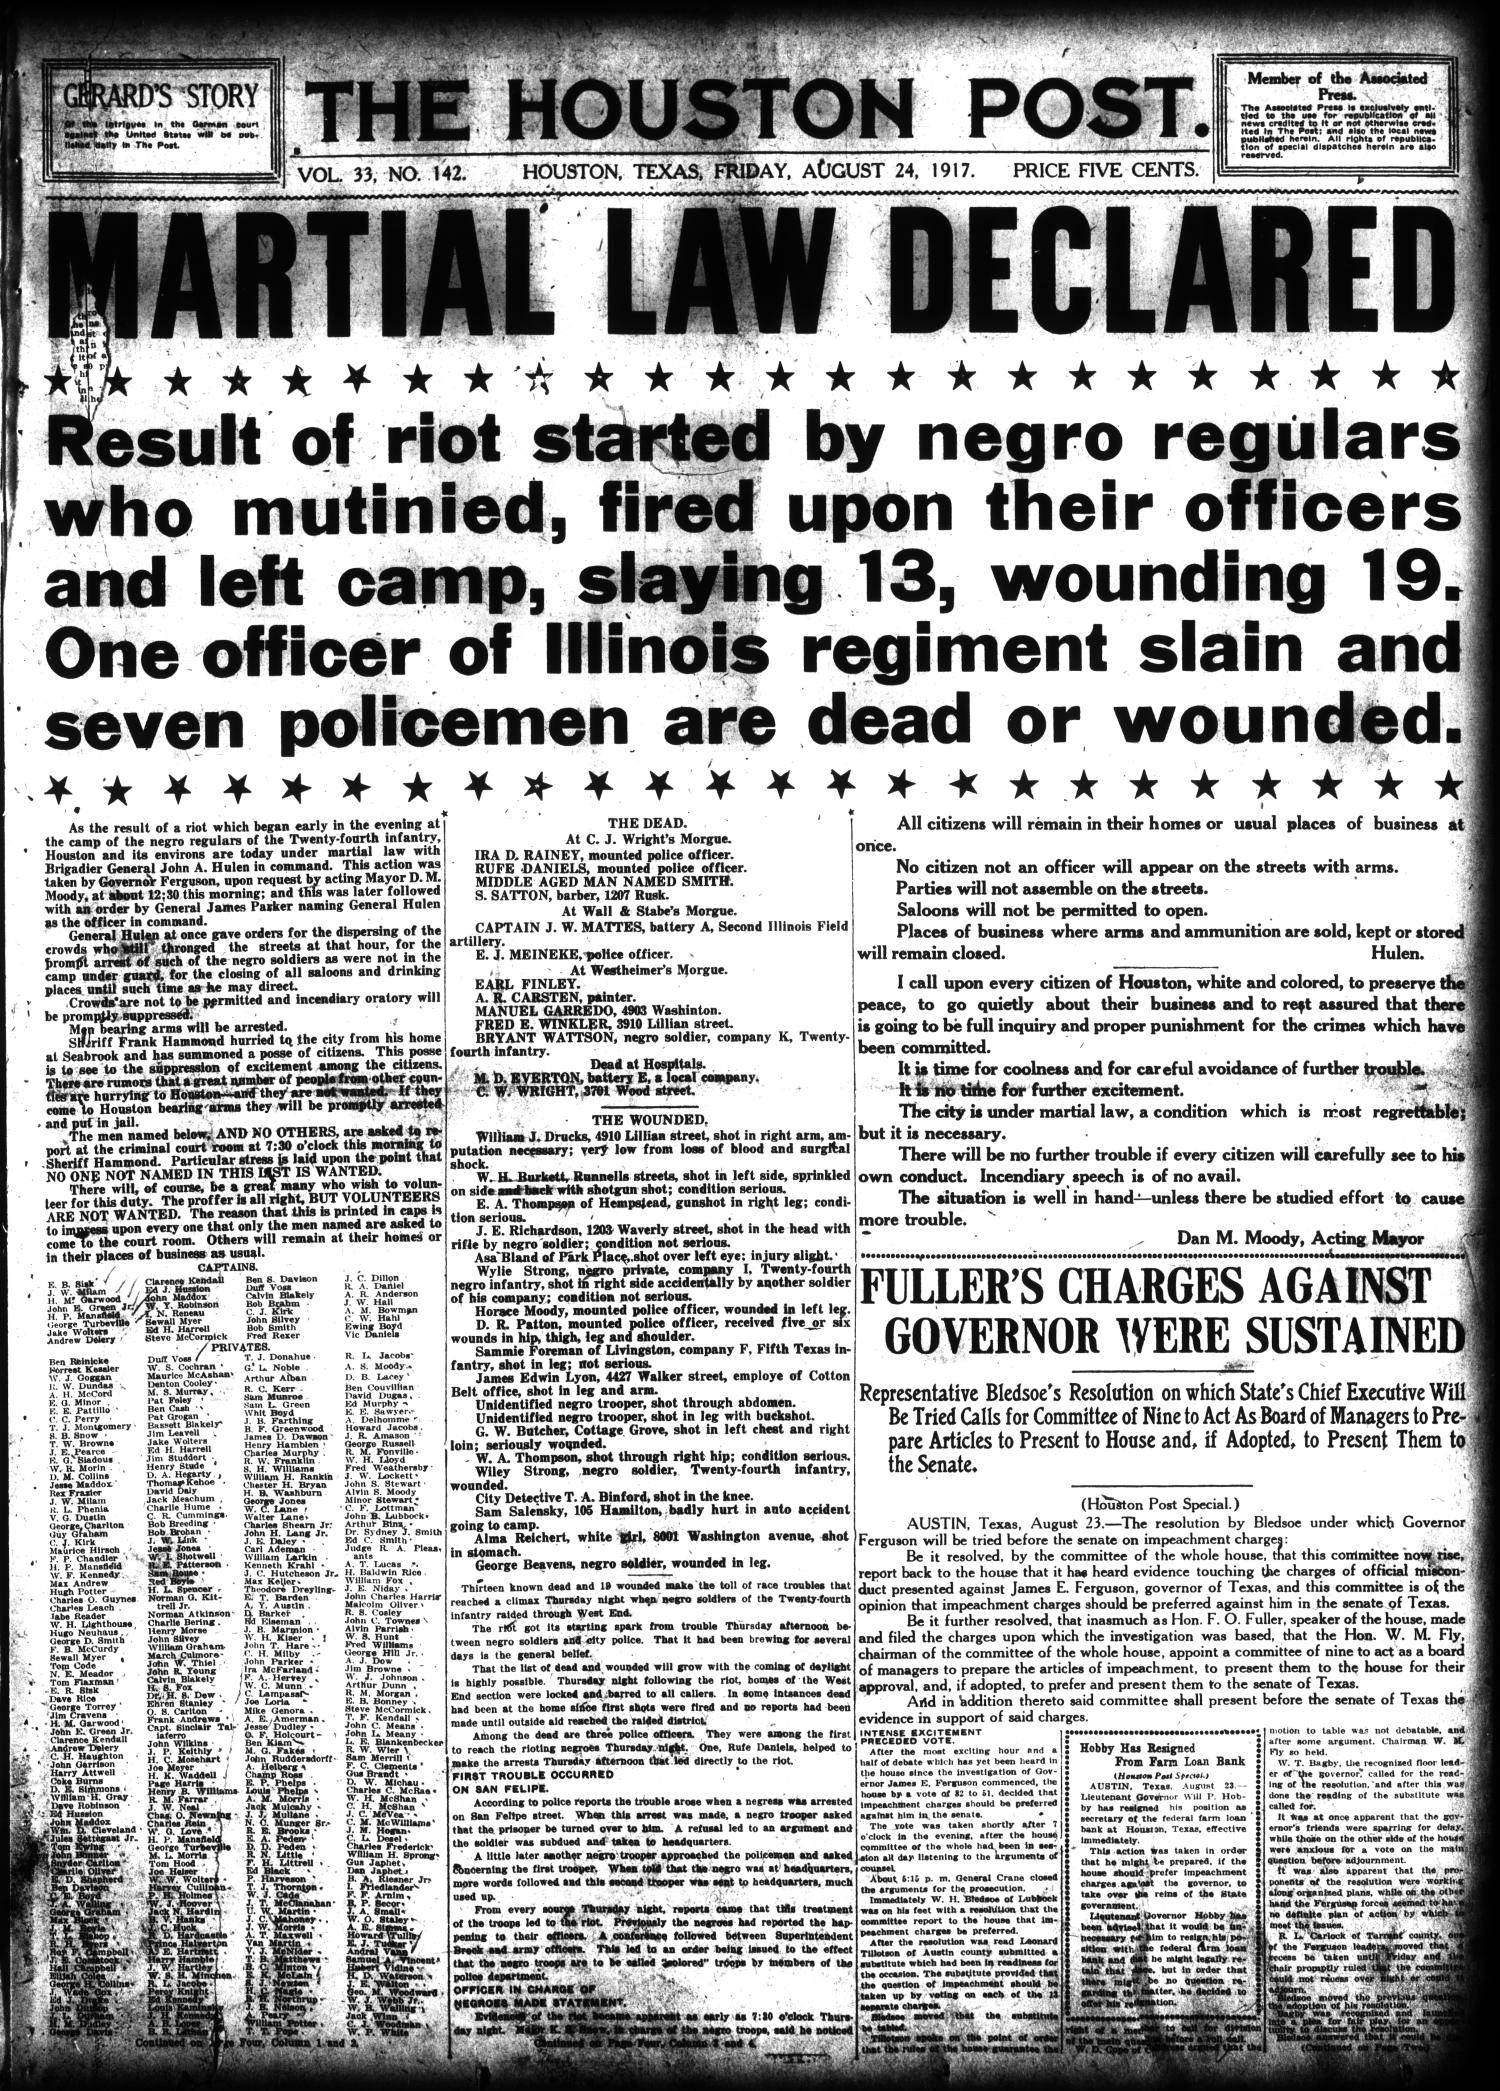 The Houston Post. (Houston, Tex.), Vol. 21, No. 364, Ed. 1 Wednesday, March  14, 1906 - Page 15 of 16 - The Portal to Texas History